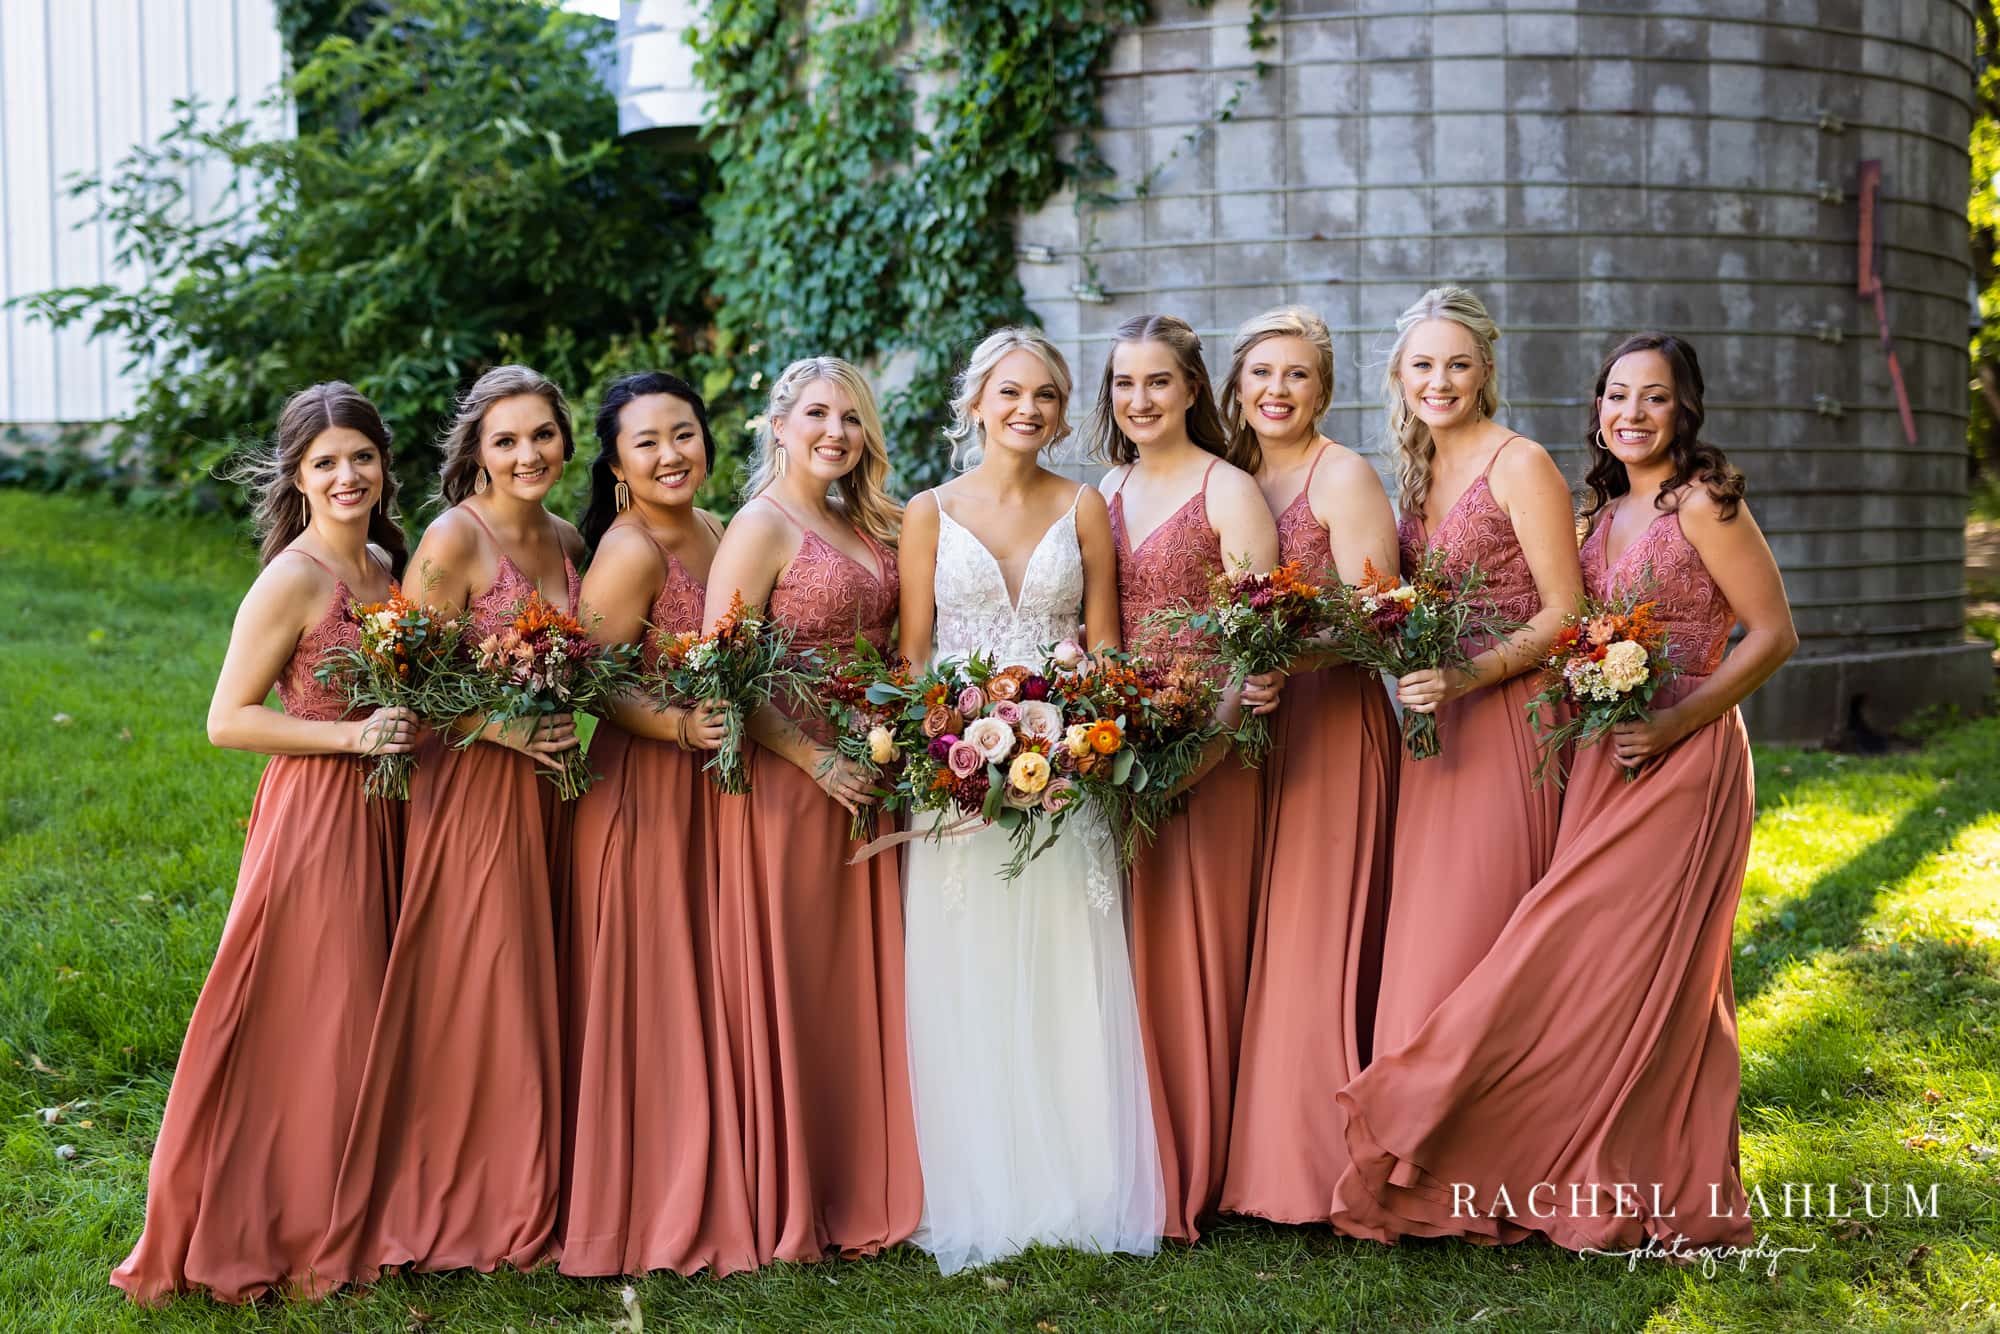 Bride and bridesmaids pose with bouquets in front of the silo at The Cottage Farmhouse.